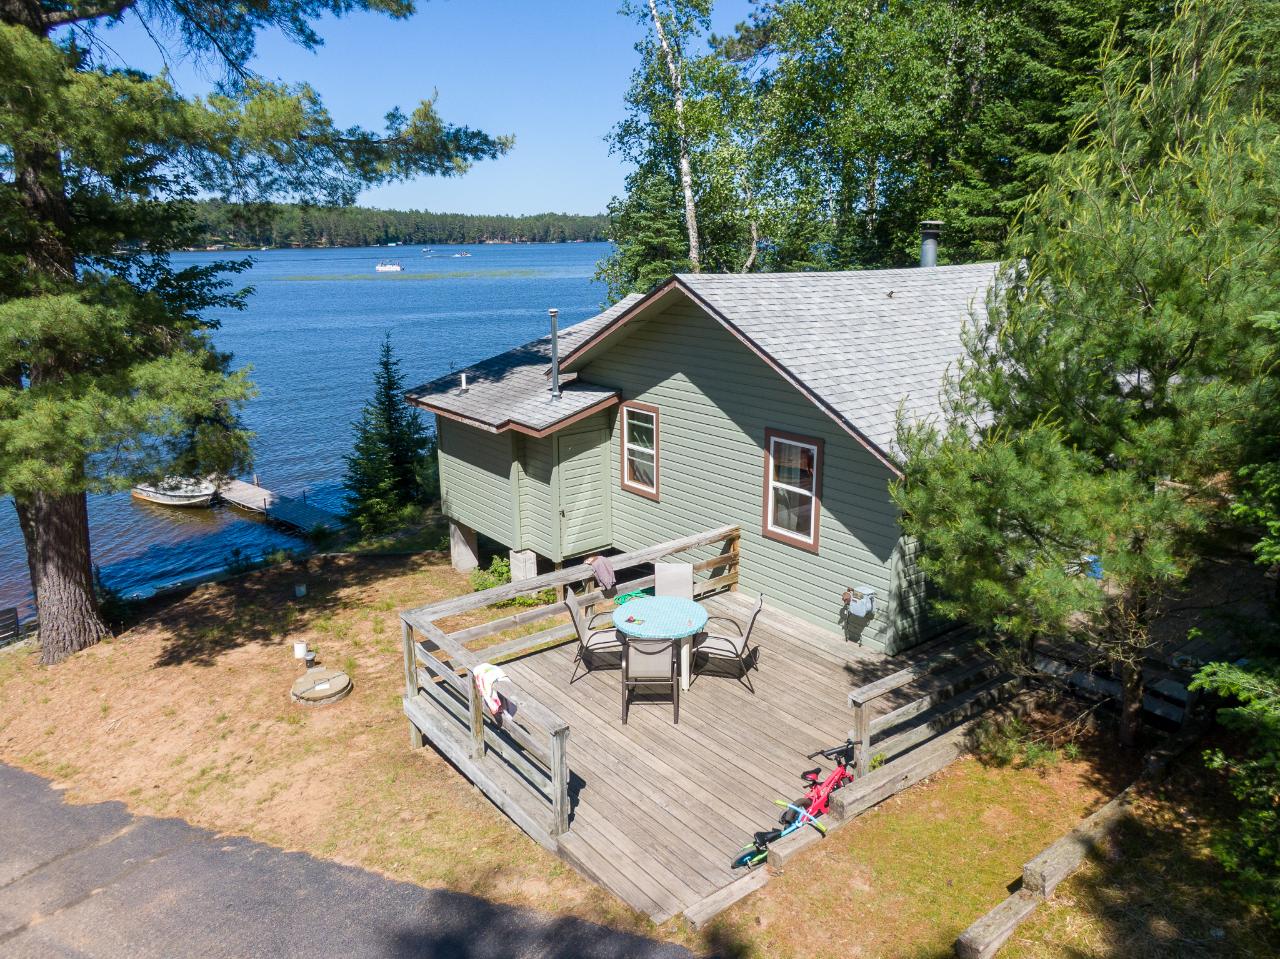 BEAUTIFUL WATERFRONT combined with investment potential in this cute Northwoods cabin! End of the road condo opportunity on Little St. Germain Lake-yet close to shopping, snowmobile trails, and bike trails. Enjoy sandy beaches, private boat launch, docks, swimming area, playground, fish cleaning house, and lakeside storage-all maintained for you! This renovated, fully furnished, seasonal, open concept 2 bedroom, 1 bath cottage includes knotty pine interior, wood burning fireplace, large deck overlooking the lake, and just a couple of steps to the lake. Wooded lot, low traffic, and 800 feet of shared sandy frontage gives a sense of privacy. Association fees include garbage, water filtration, propane, grounds upkeep, and legal fees. Little St. Germain Lake has great fishing and is a Class A Musky Lake. Condo Assoc has Right of First Refusal. There's a lawsuit ongoing with another assoc. member--ask about lis pendens. Buyer to verify all dimensions.